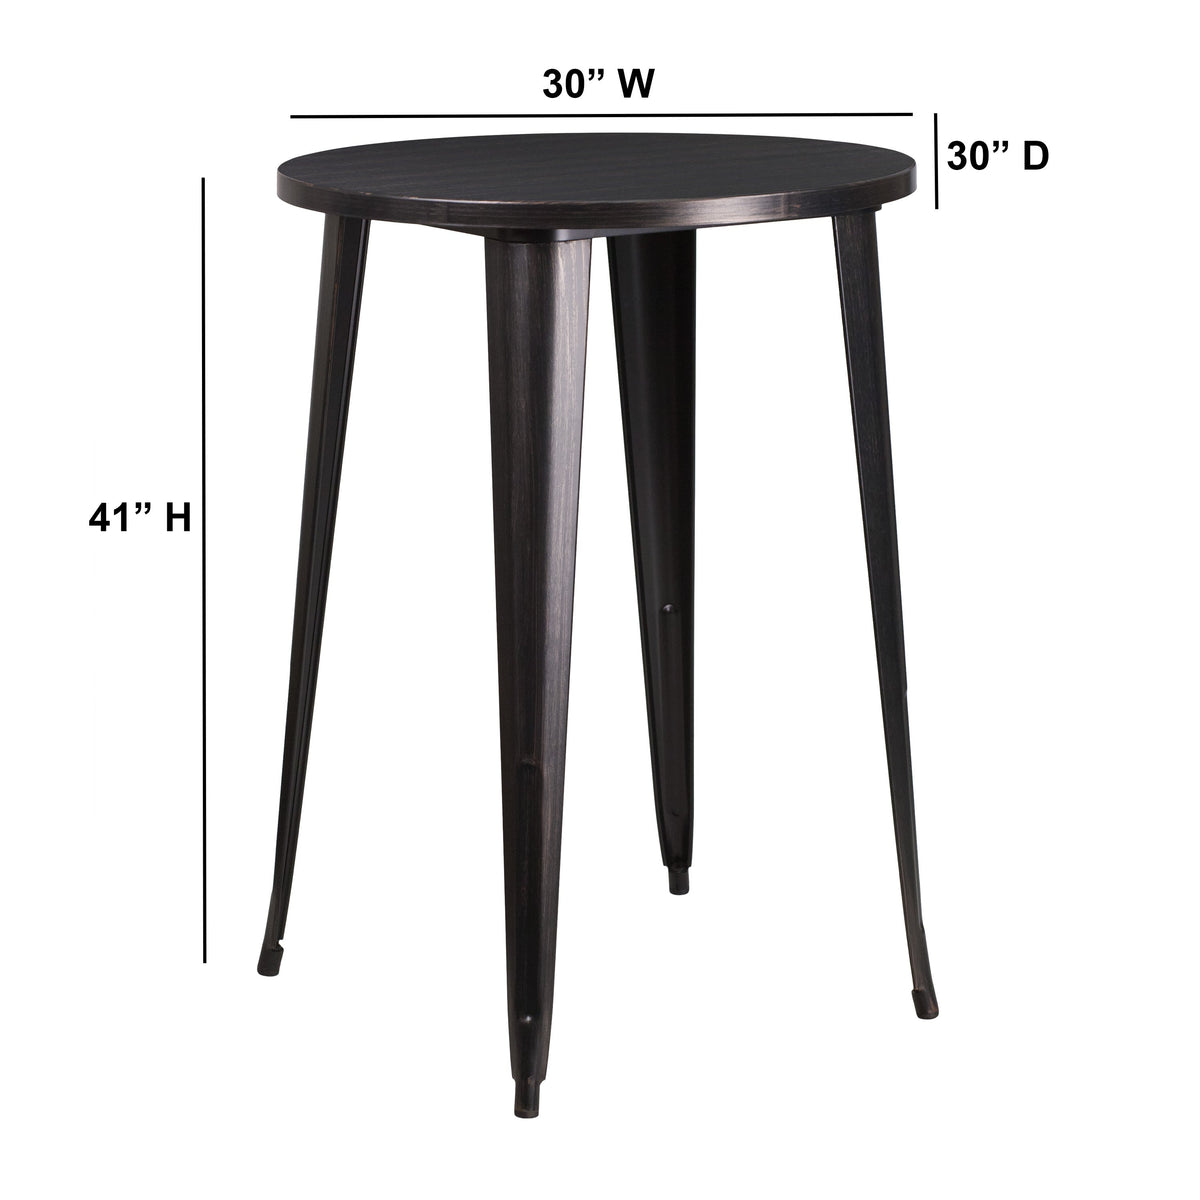 Black-Antique Gold |#| 30inch Round Black-Gold Metal Indoor-Outdoor Bar Height Table - Industrial Table